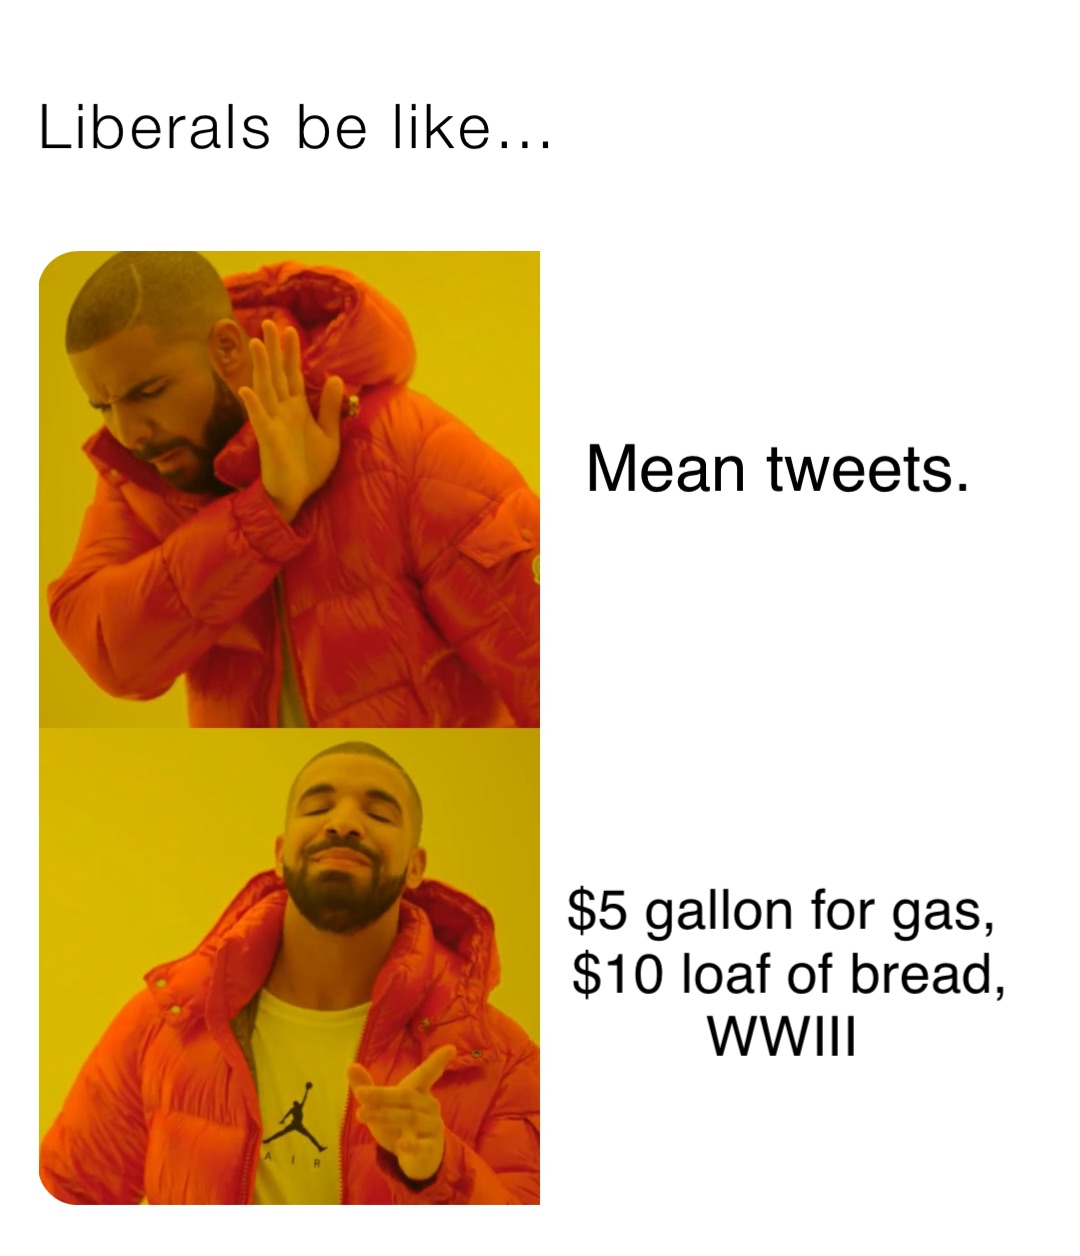 Liberals be like… Mean tweets. $5 gallon for gas,
$10 loaf of bread, 
WWIII